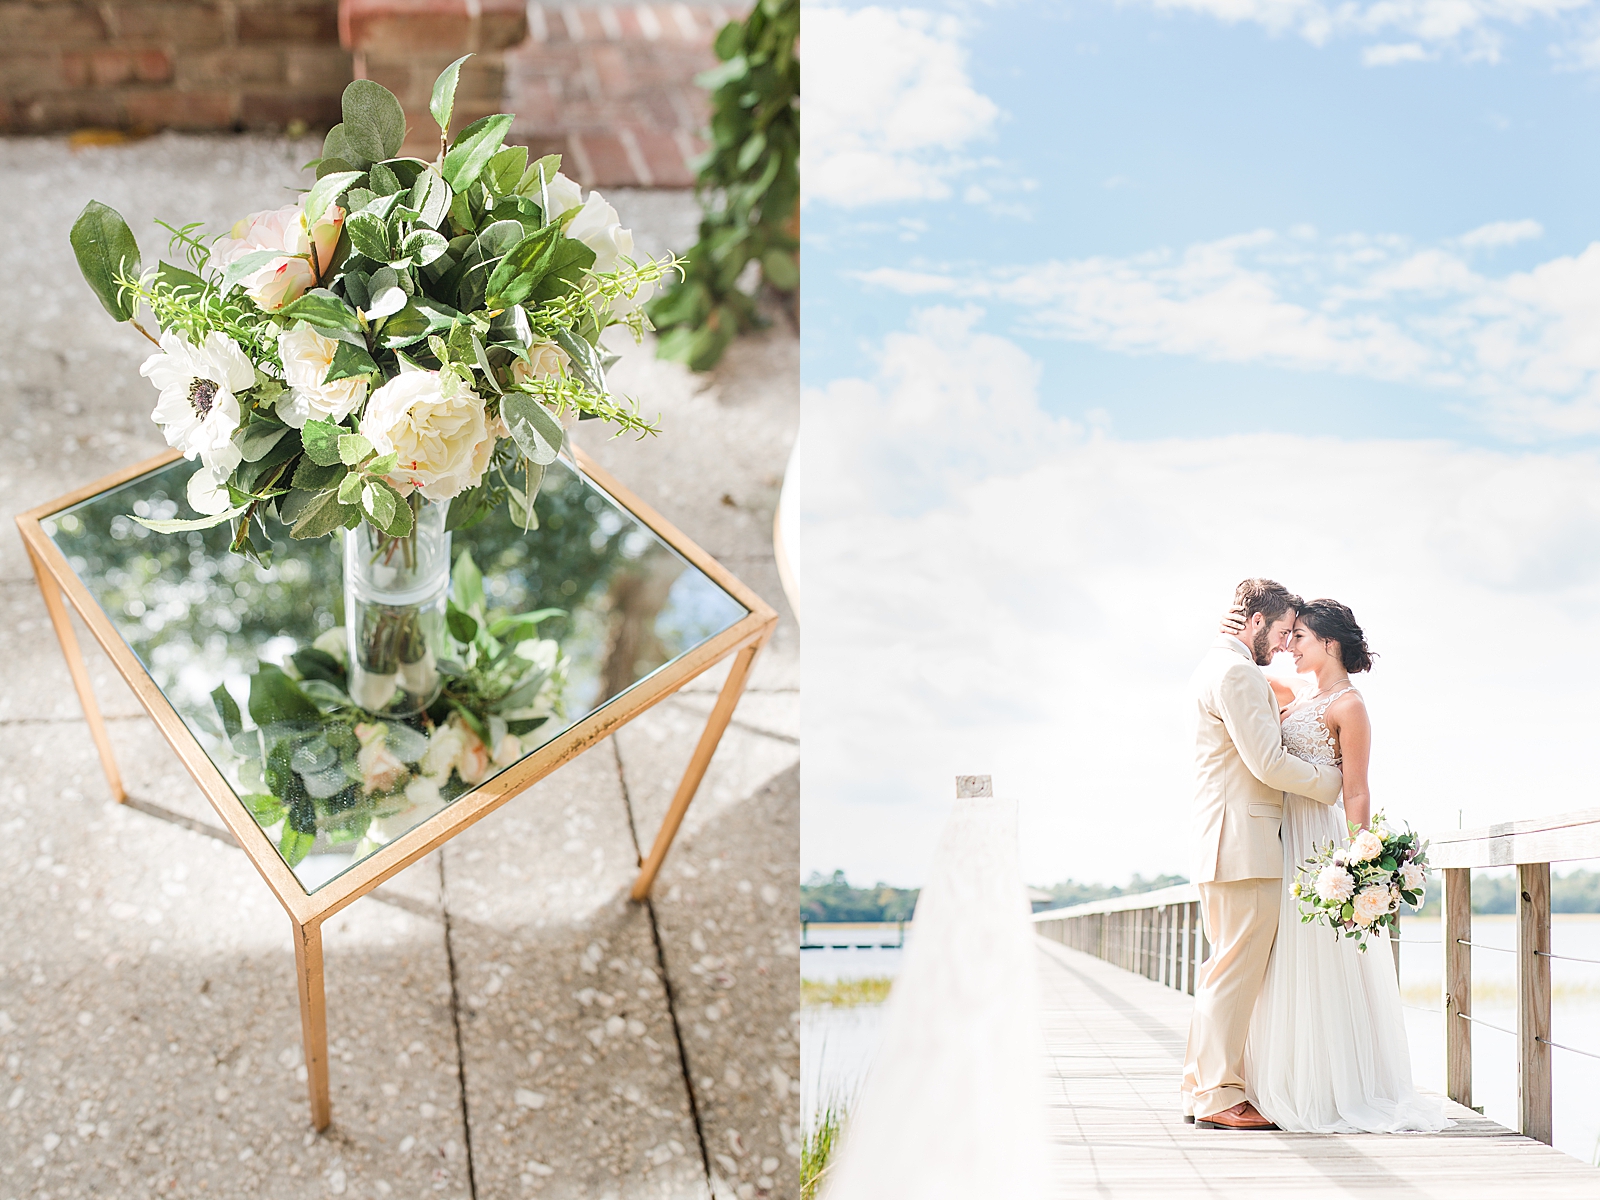 Charleston Wedding at Lowndes Grove Flowers on side table and Bride and Groom nose to nose on dock Photos